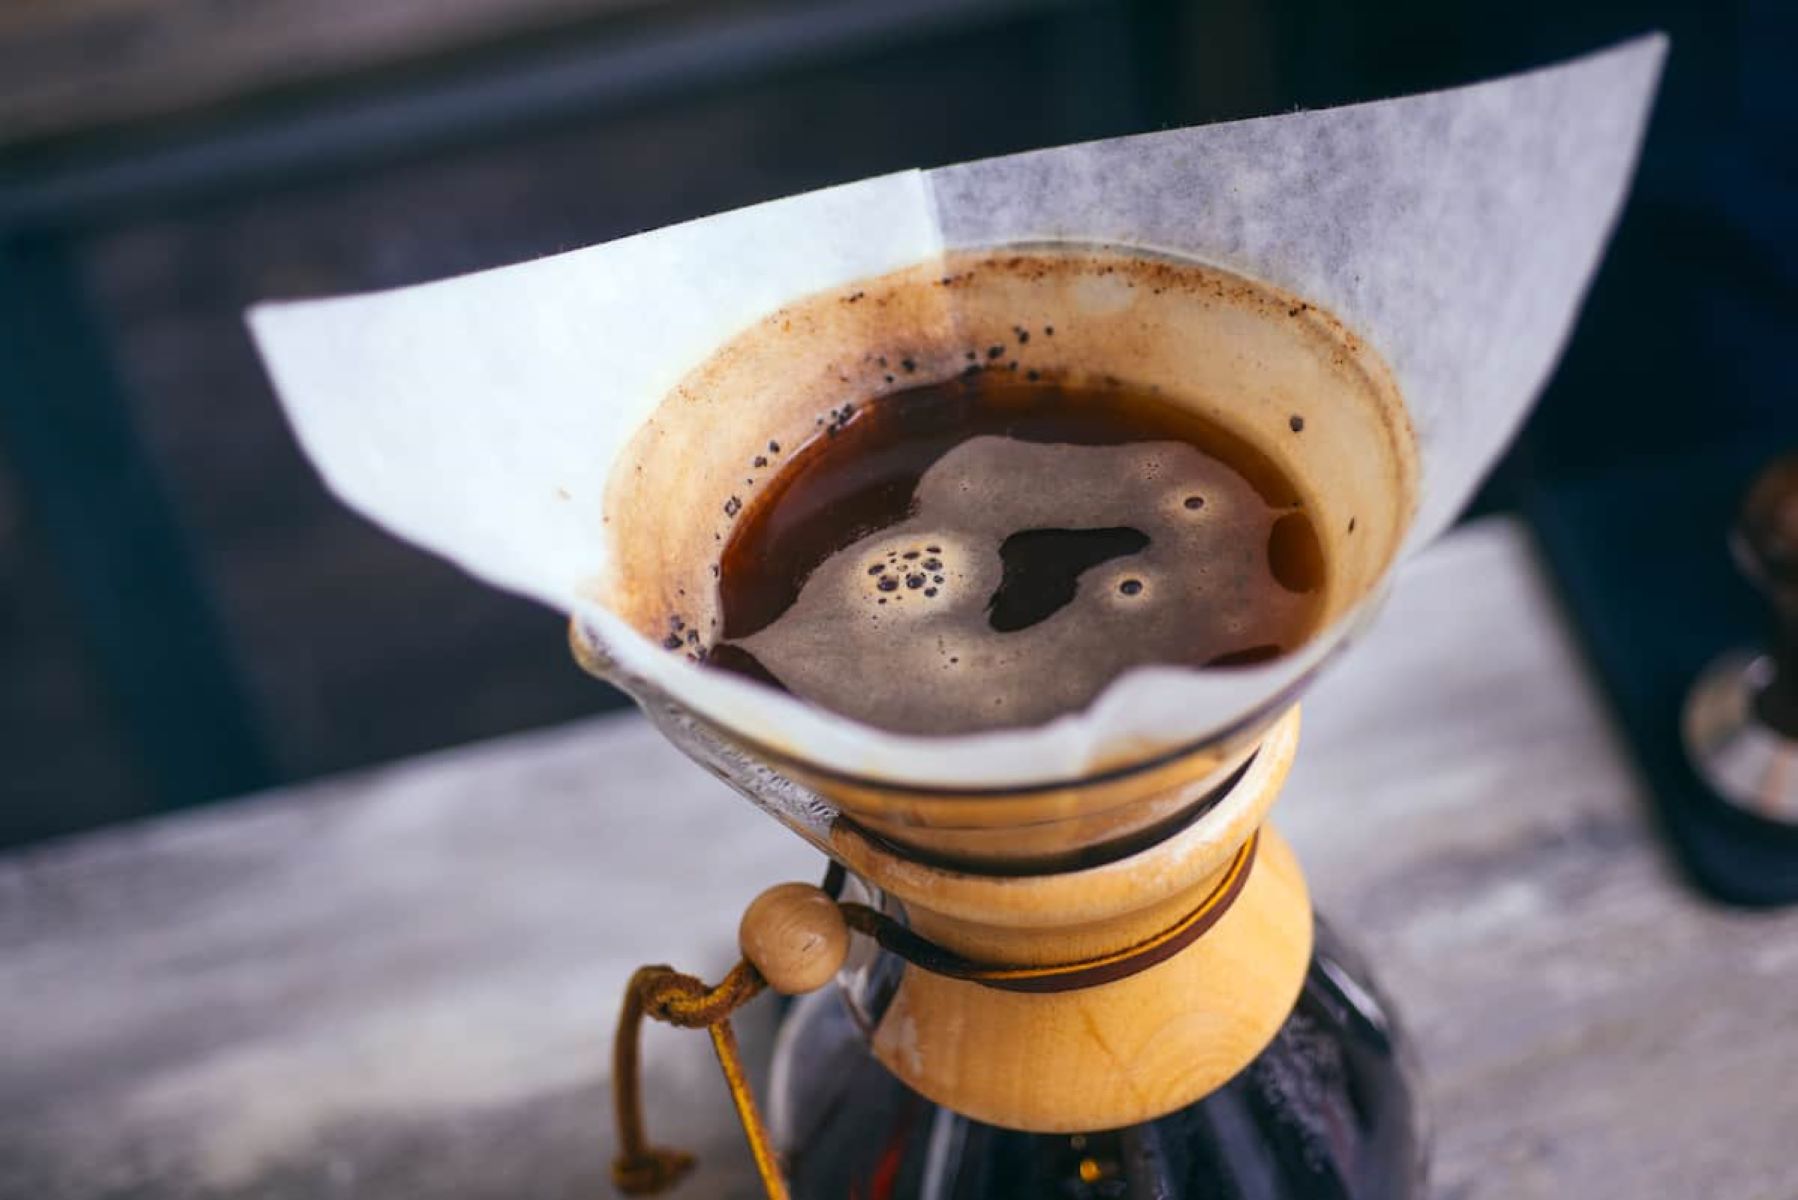 How To Strain Coffee Grounds Without A Strainer